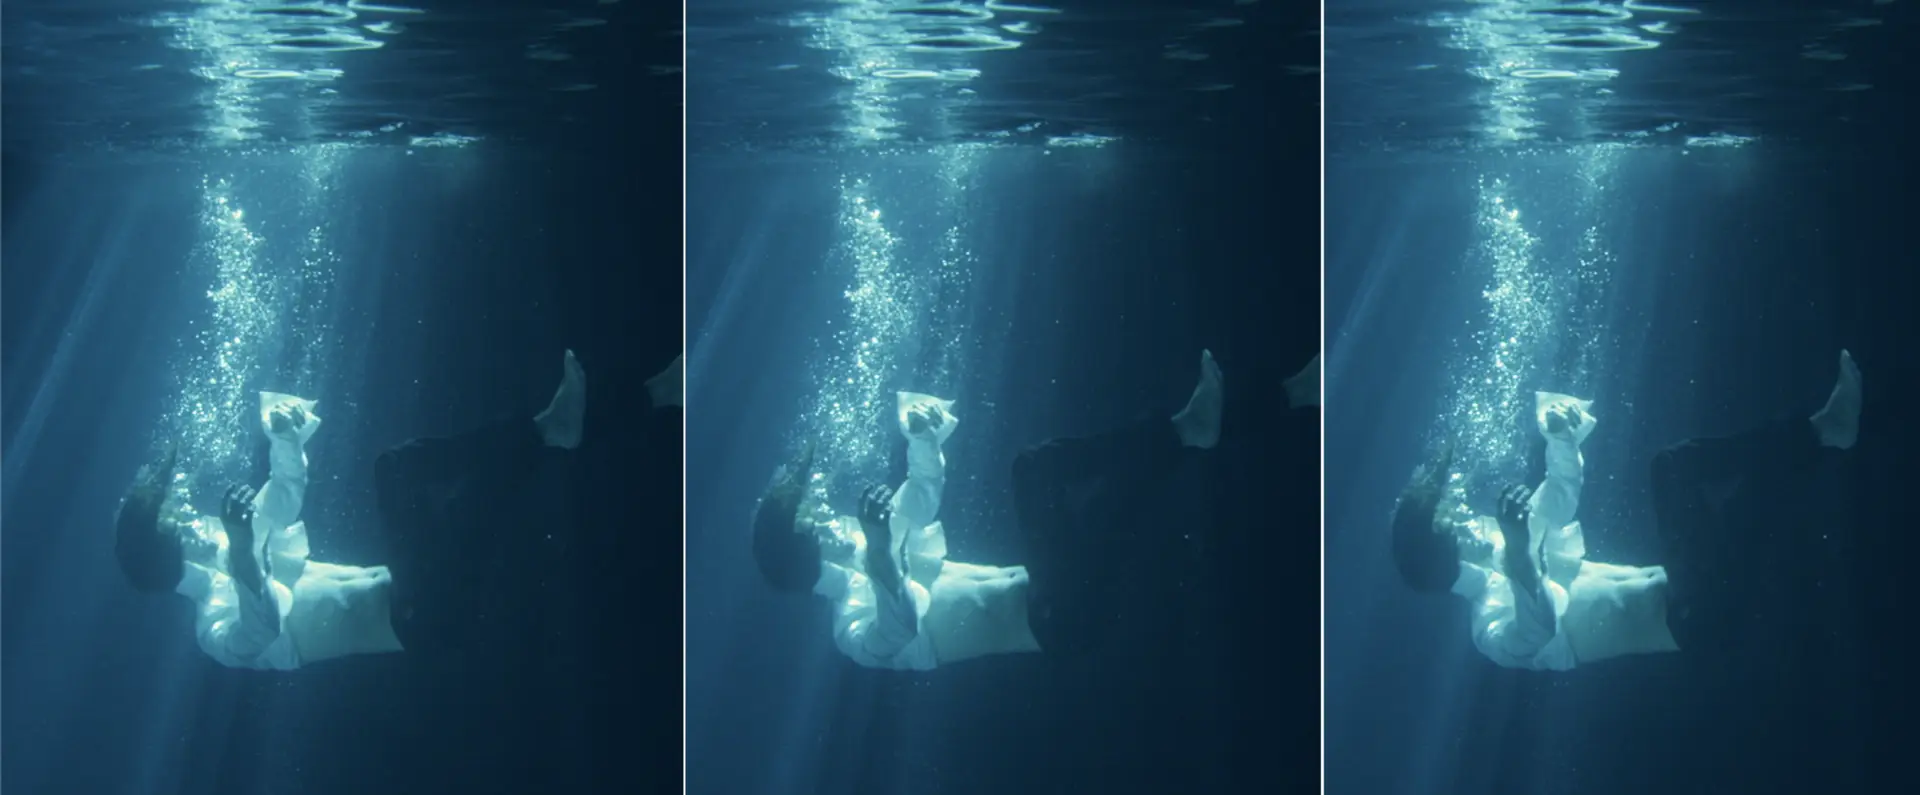 Four images of a woman swimming in the water, evoking the mystery of a Cold Case.